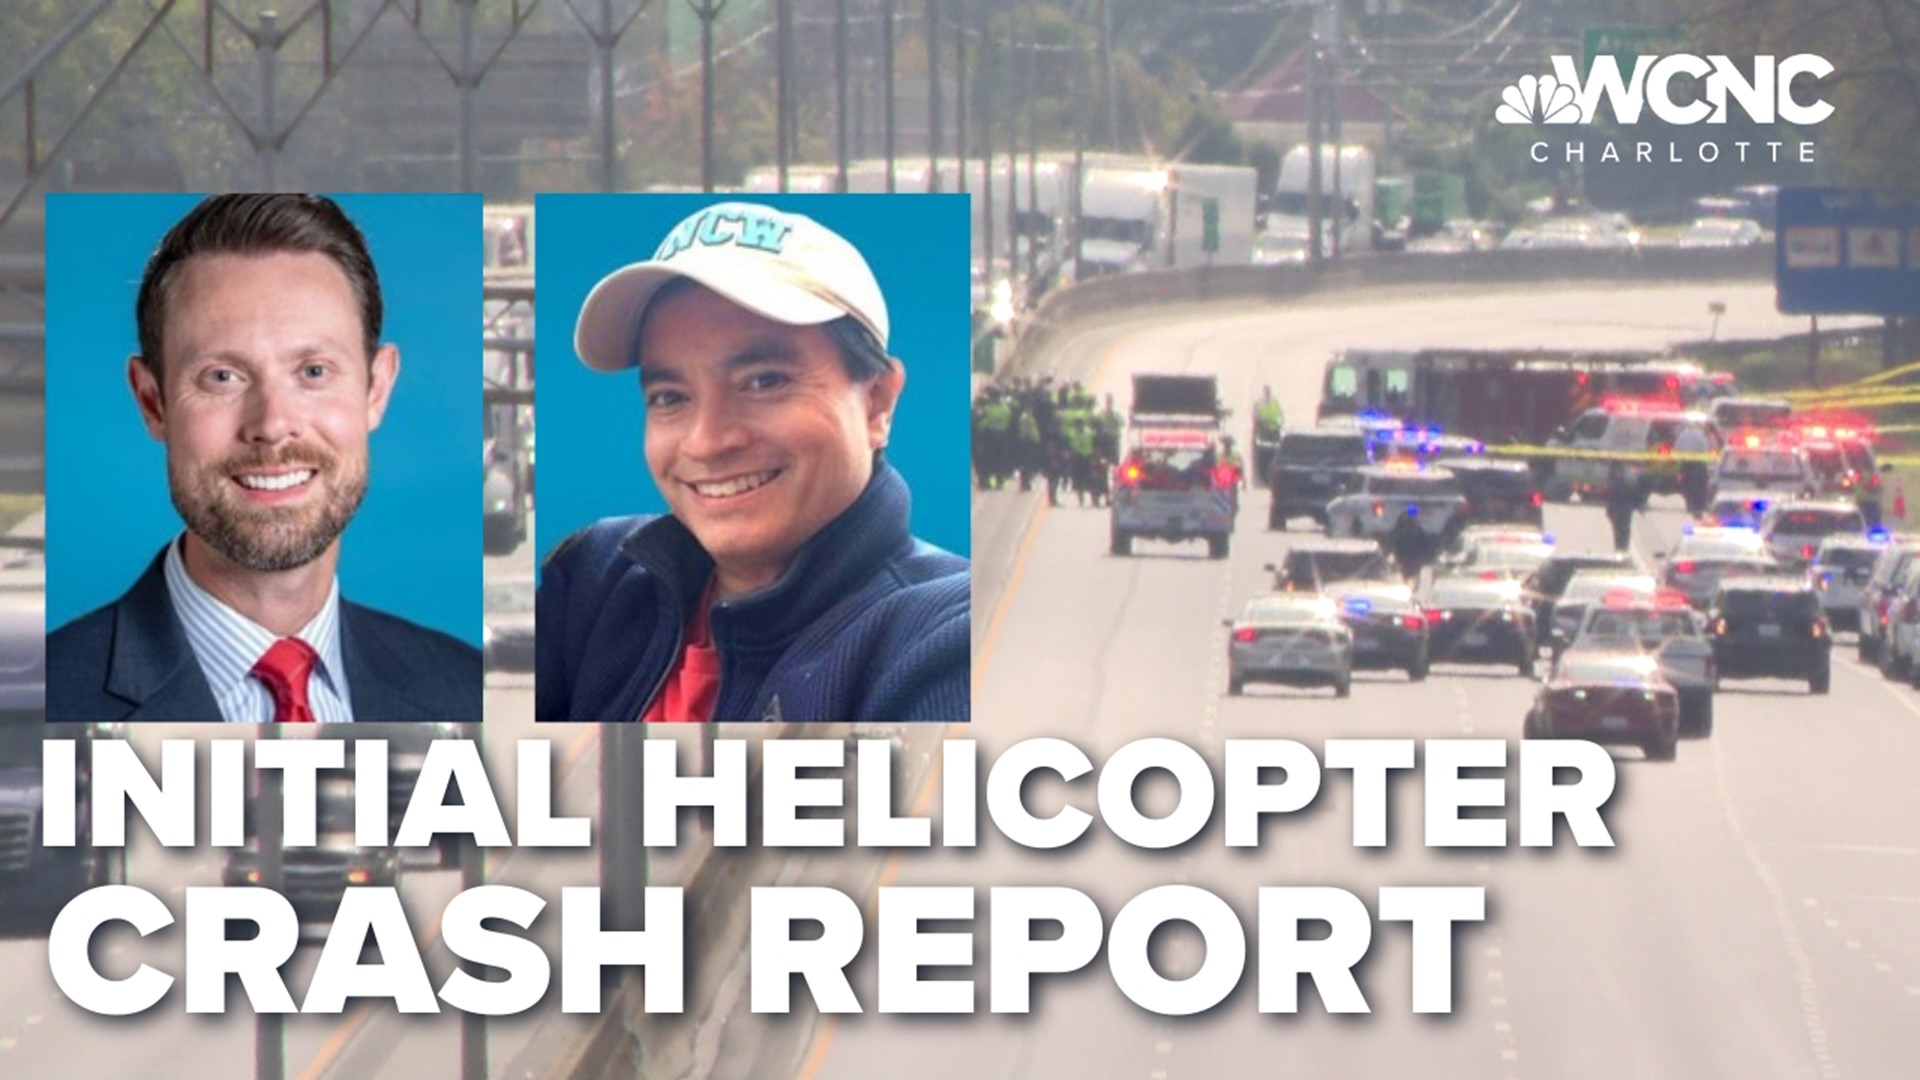 The NTSB released its preliminary report on the helicopter crash that tragically killed WBTV Meteorologist Jason Meyers and pilot Chip Tayag.